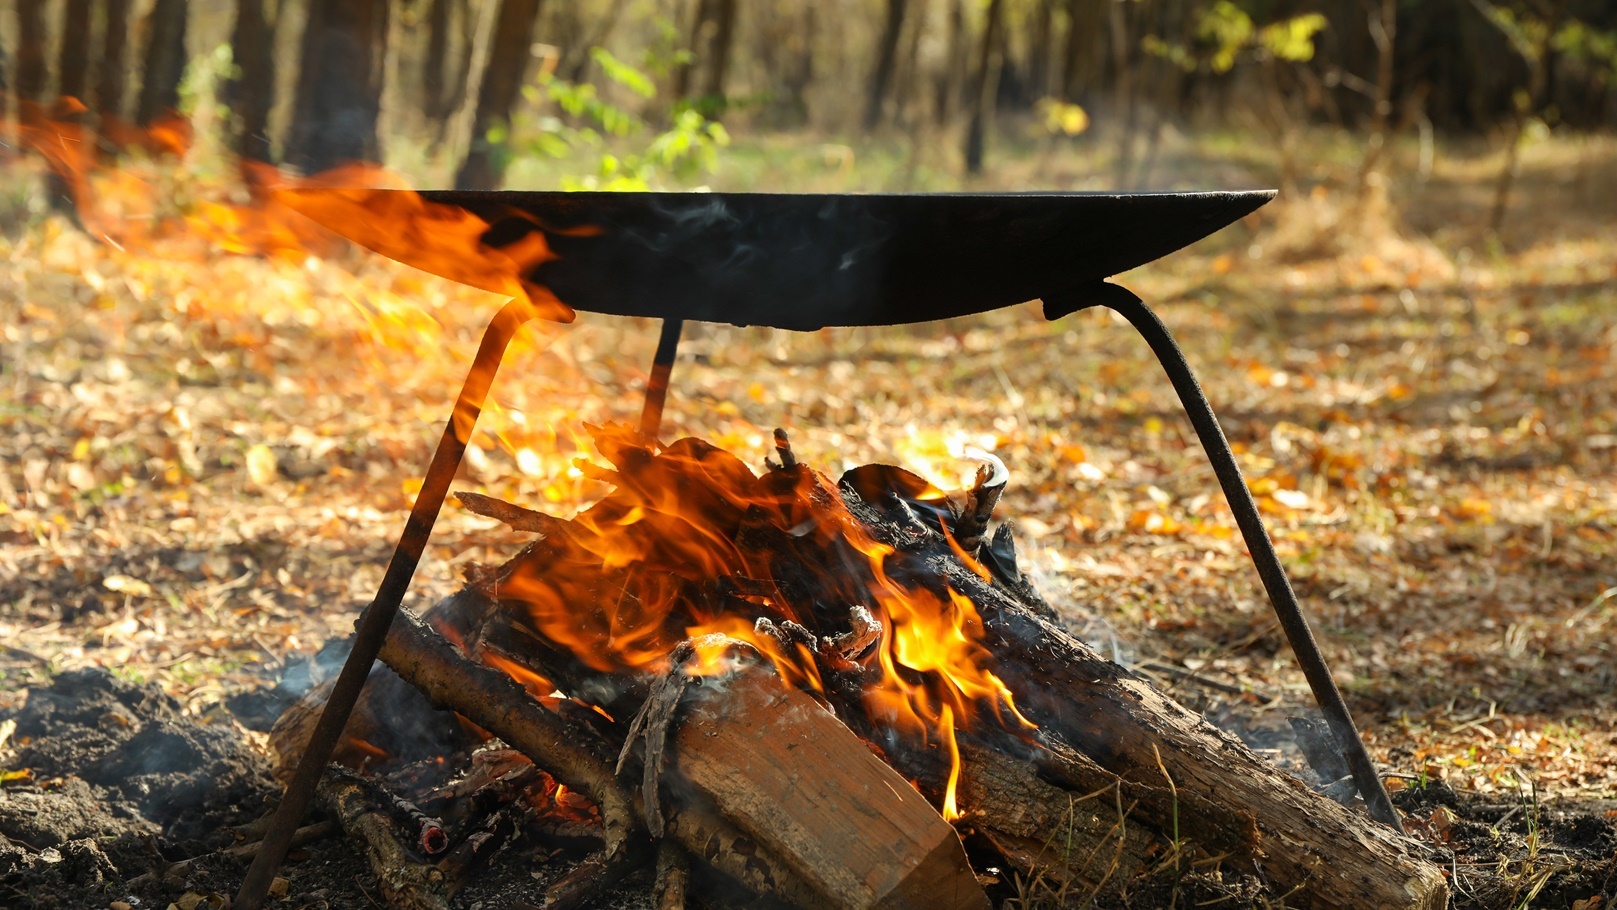 barbecue-brazier-and-bonfire-in-forest-space-for-2021-09-02-20-10-37-utc